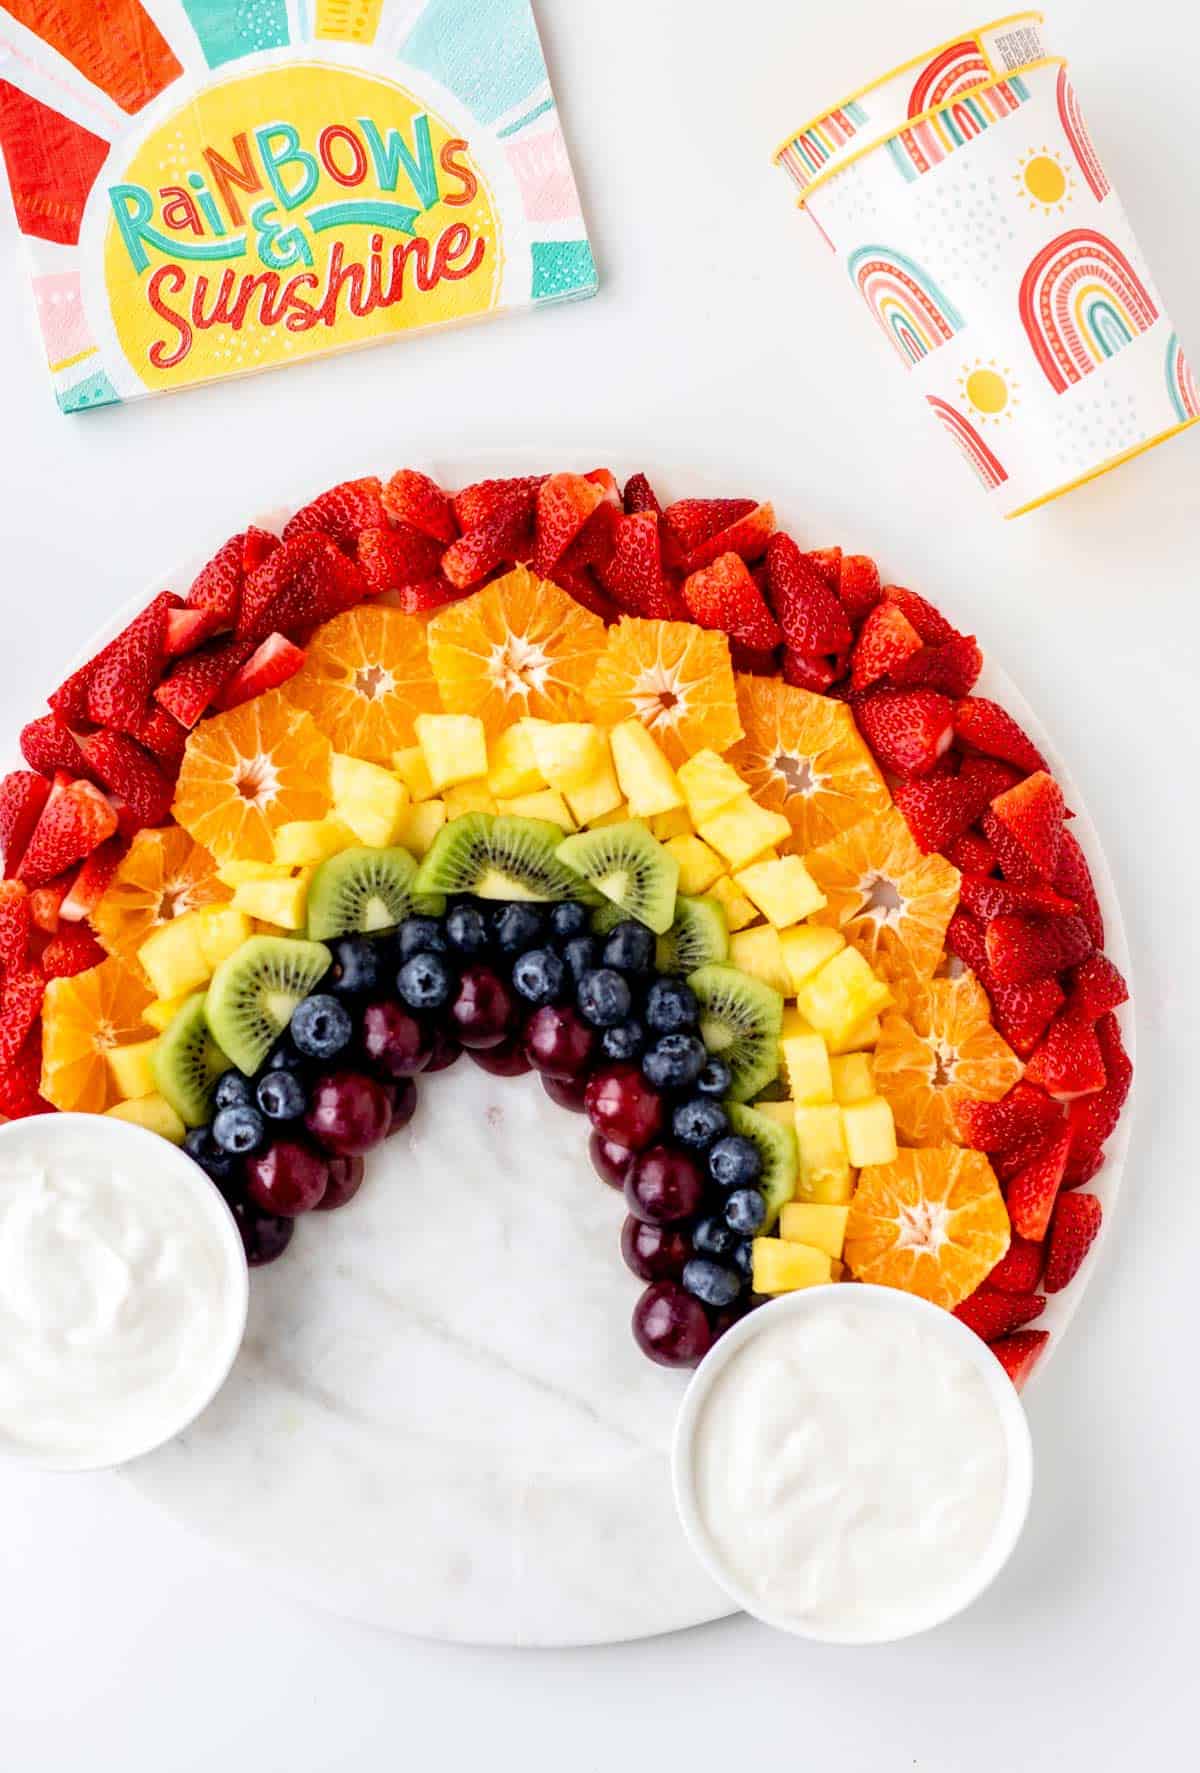 A colorful rainbow fruit tray with vanilla yogurt dip in small bowls at each side of the rainbow to resemble clouds.